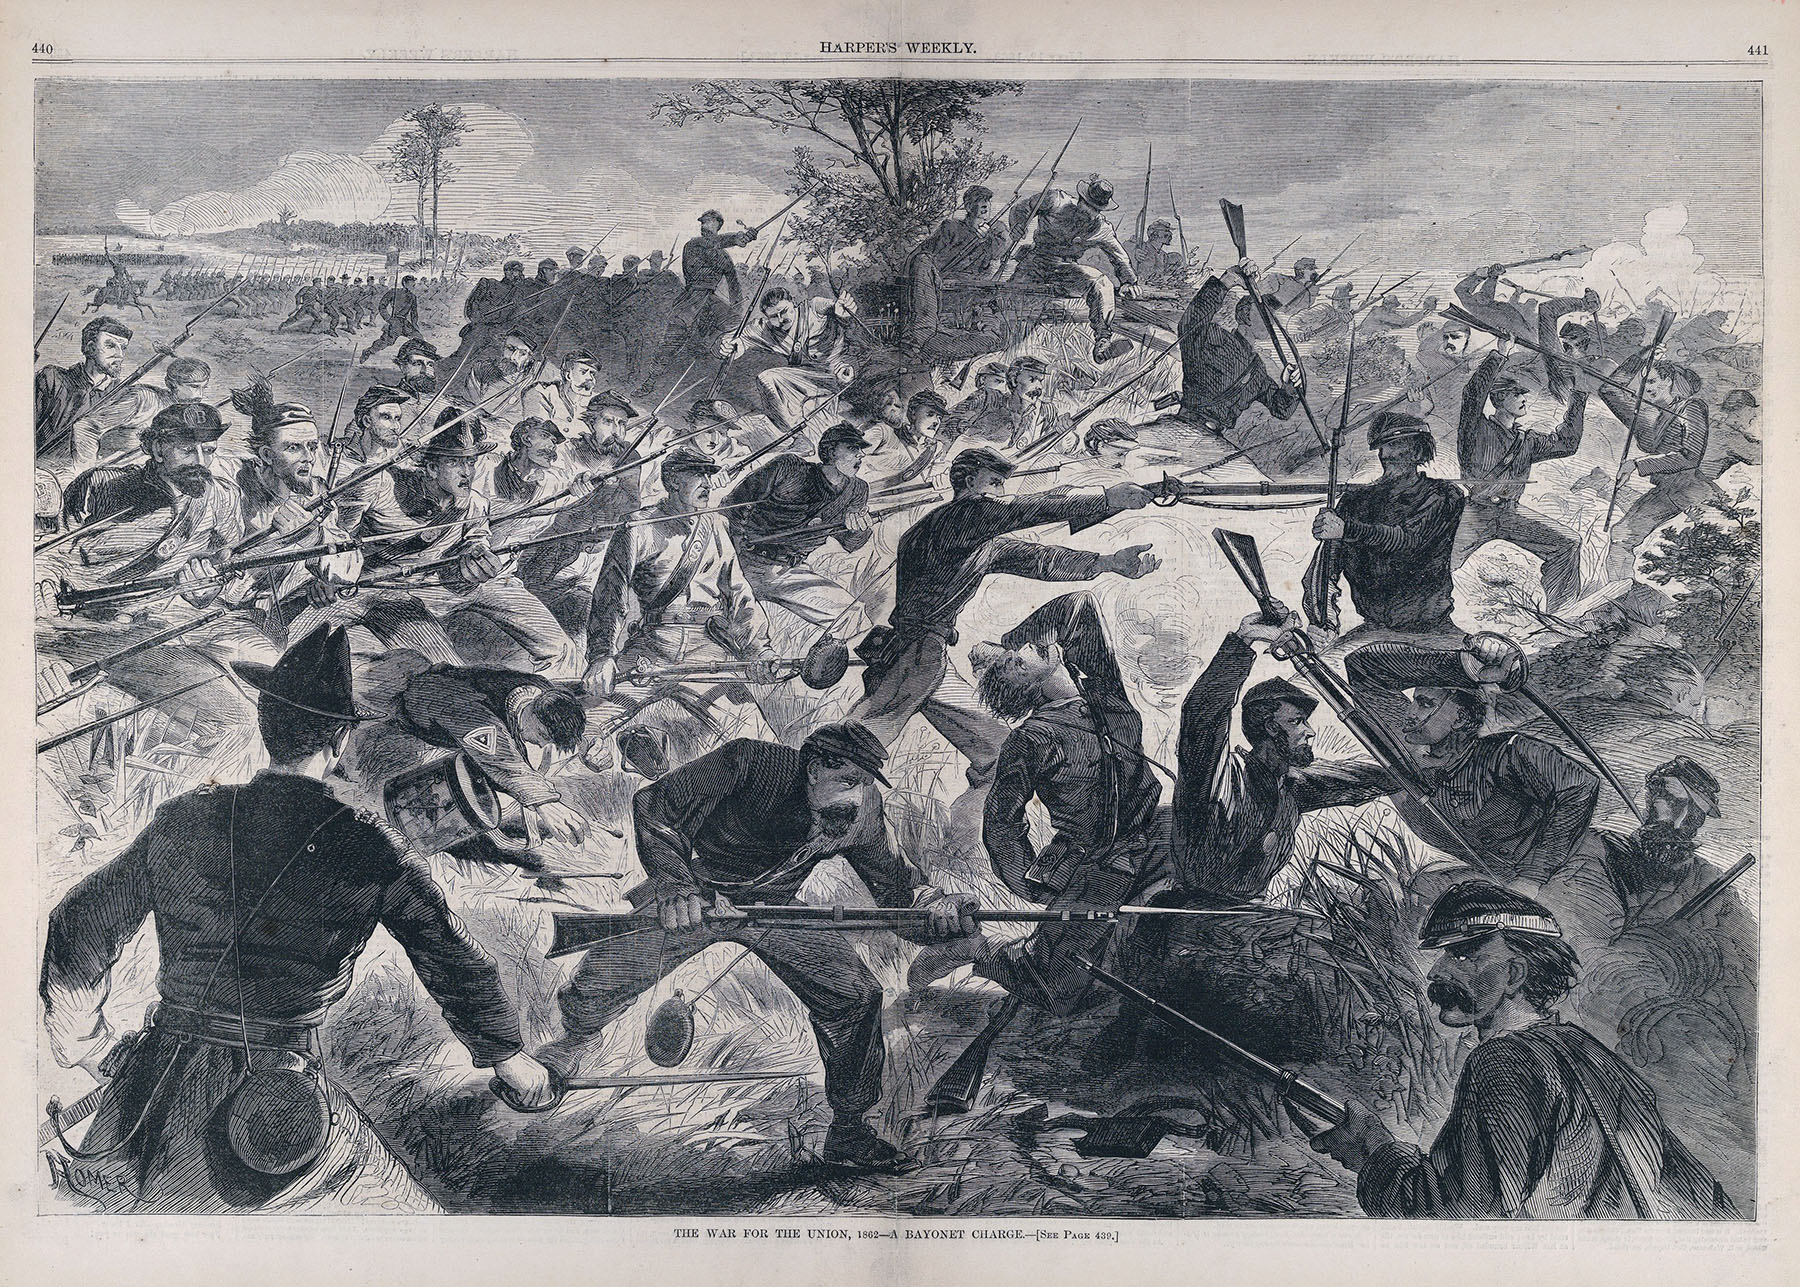 After Winslow Homer, "The War for the Union, 1862—A Bayonet Charge," <em>Harper's Weekly</em>, July 12, 1862, wood engraving on paper, 40.8 x 57.5 cm (<a href="https://www.metmuseum.org/art/collection/search/392186" target="_blank" rel="noopener">The Metropolitan Museum of Art</a>)